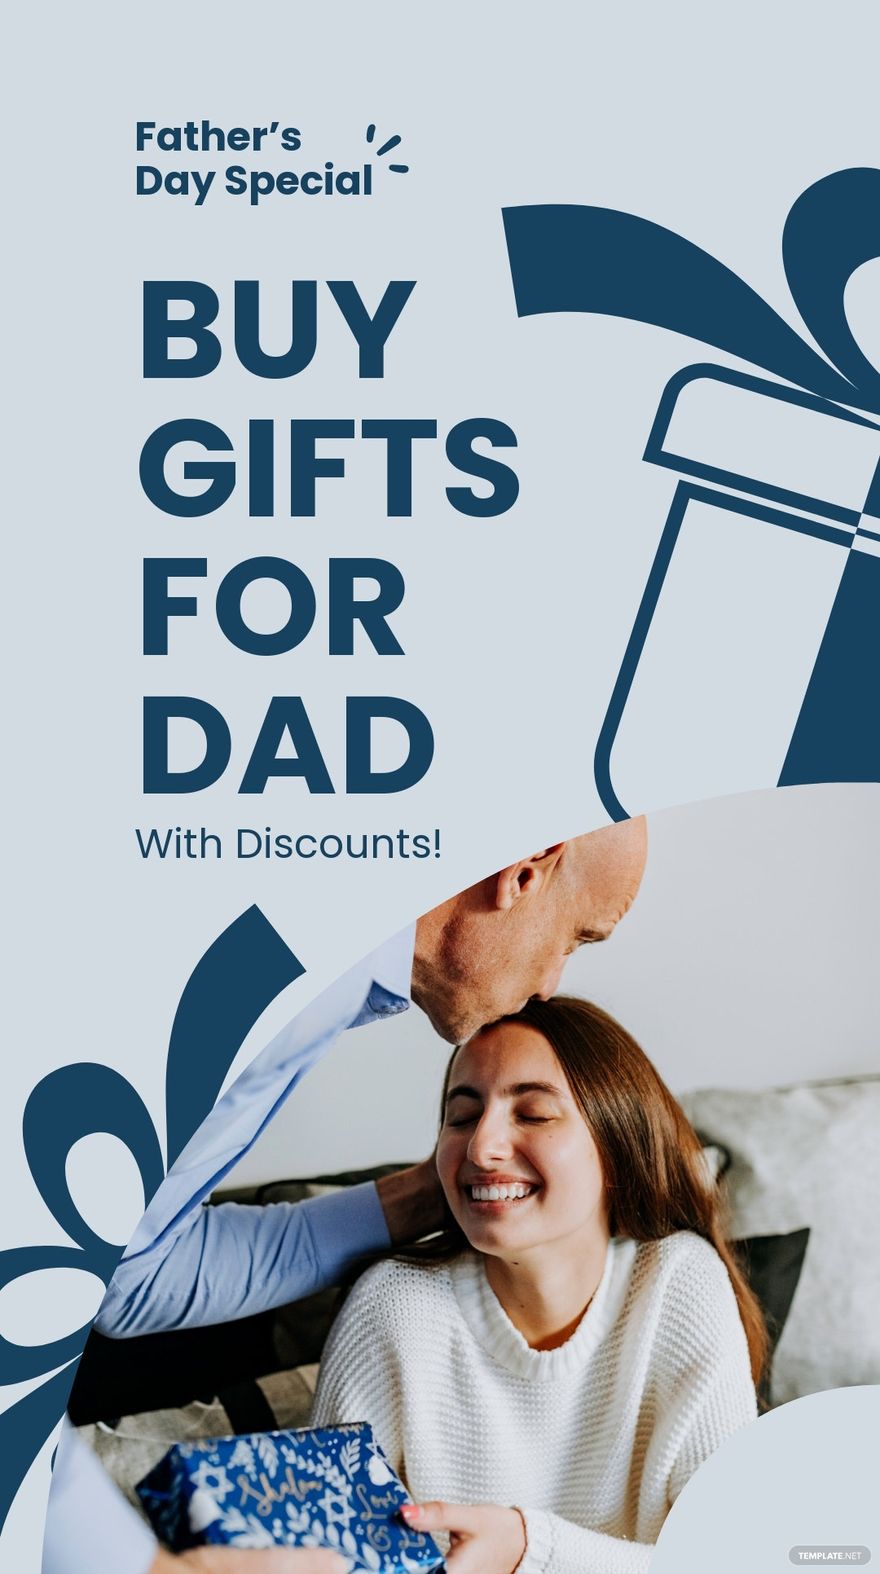 Father's Day Sale Whatsapp Post Template